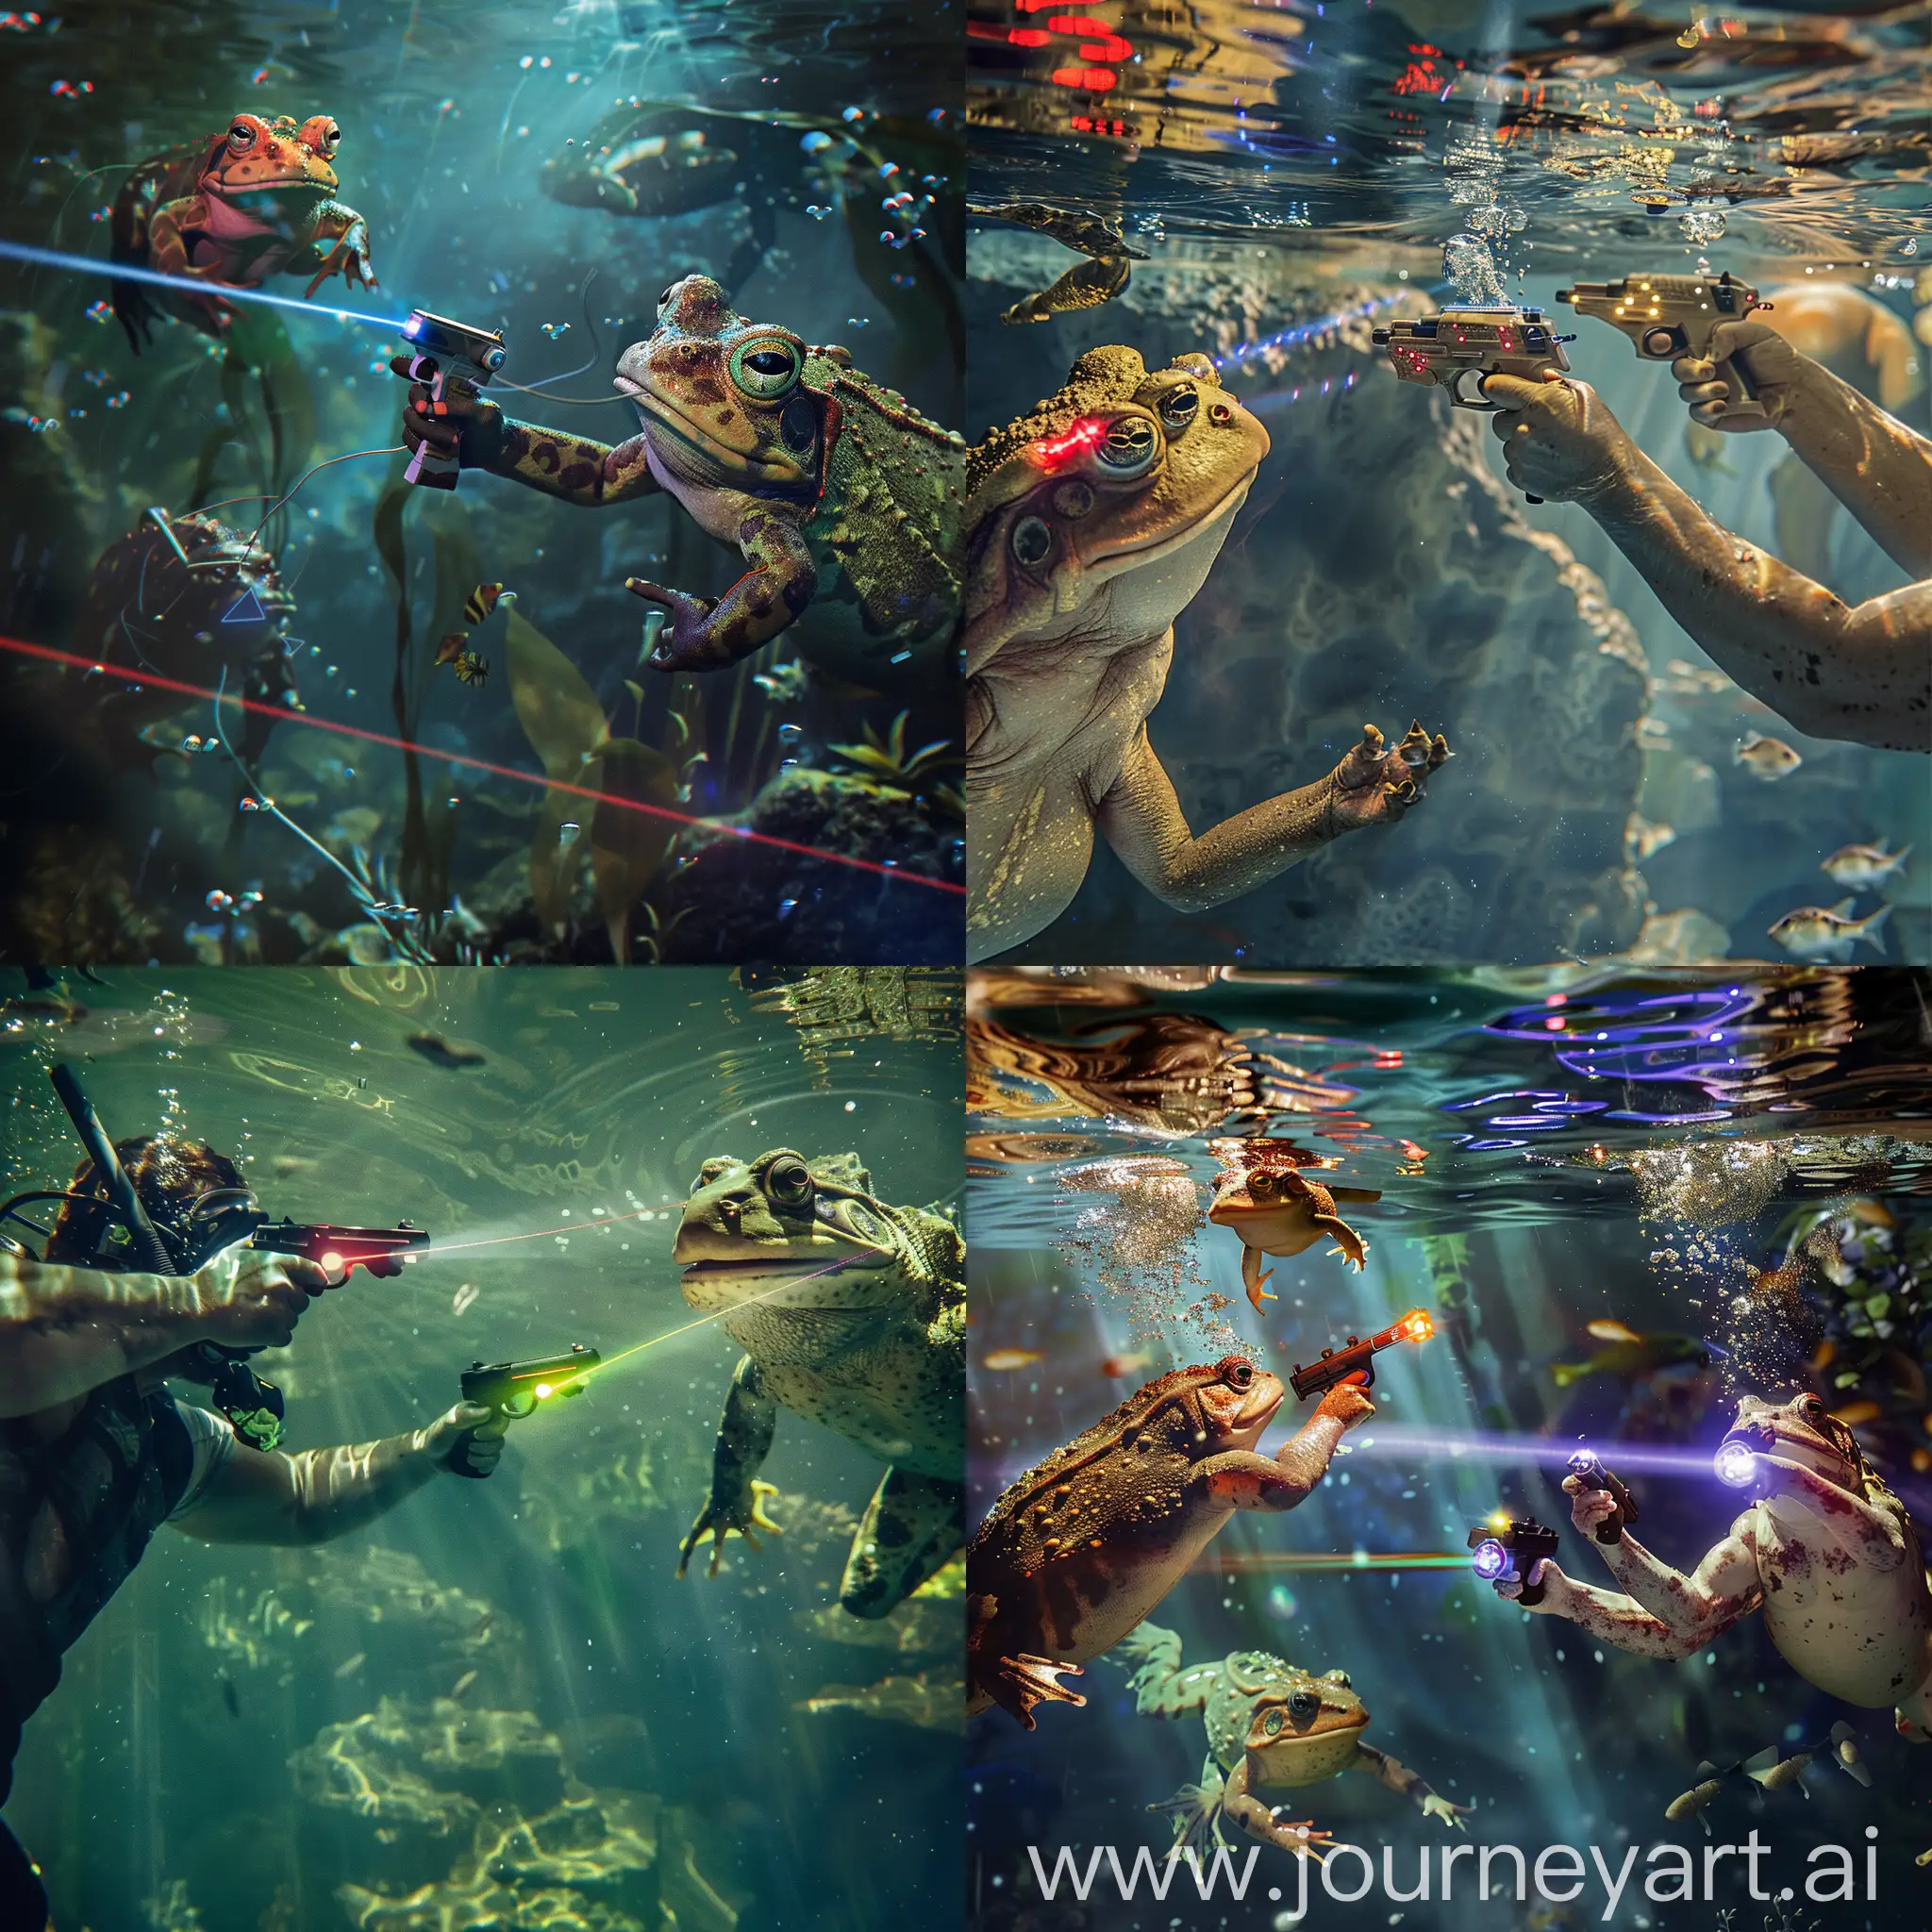 Underwater-Laser-Tag-with-Gungans-and-Humans